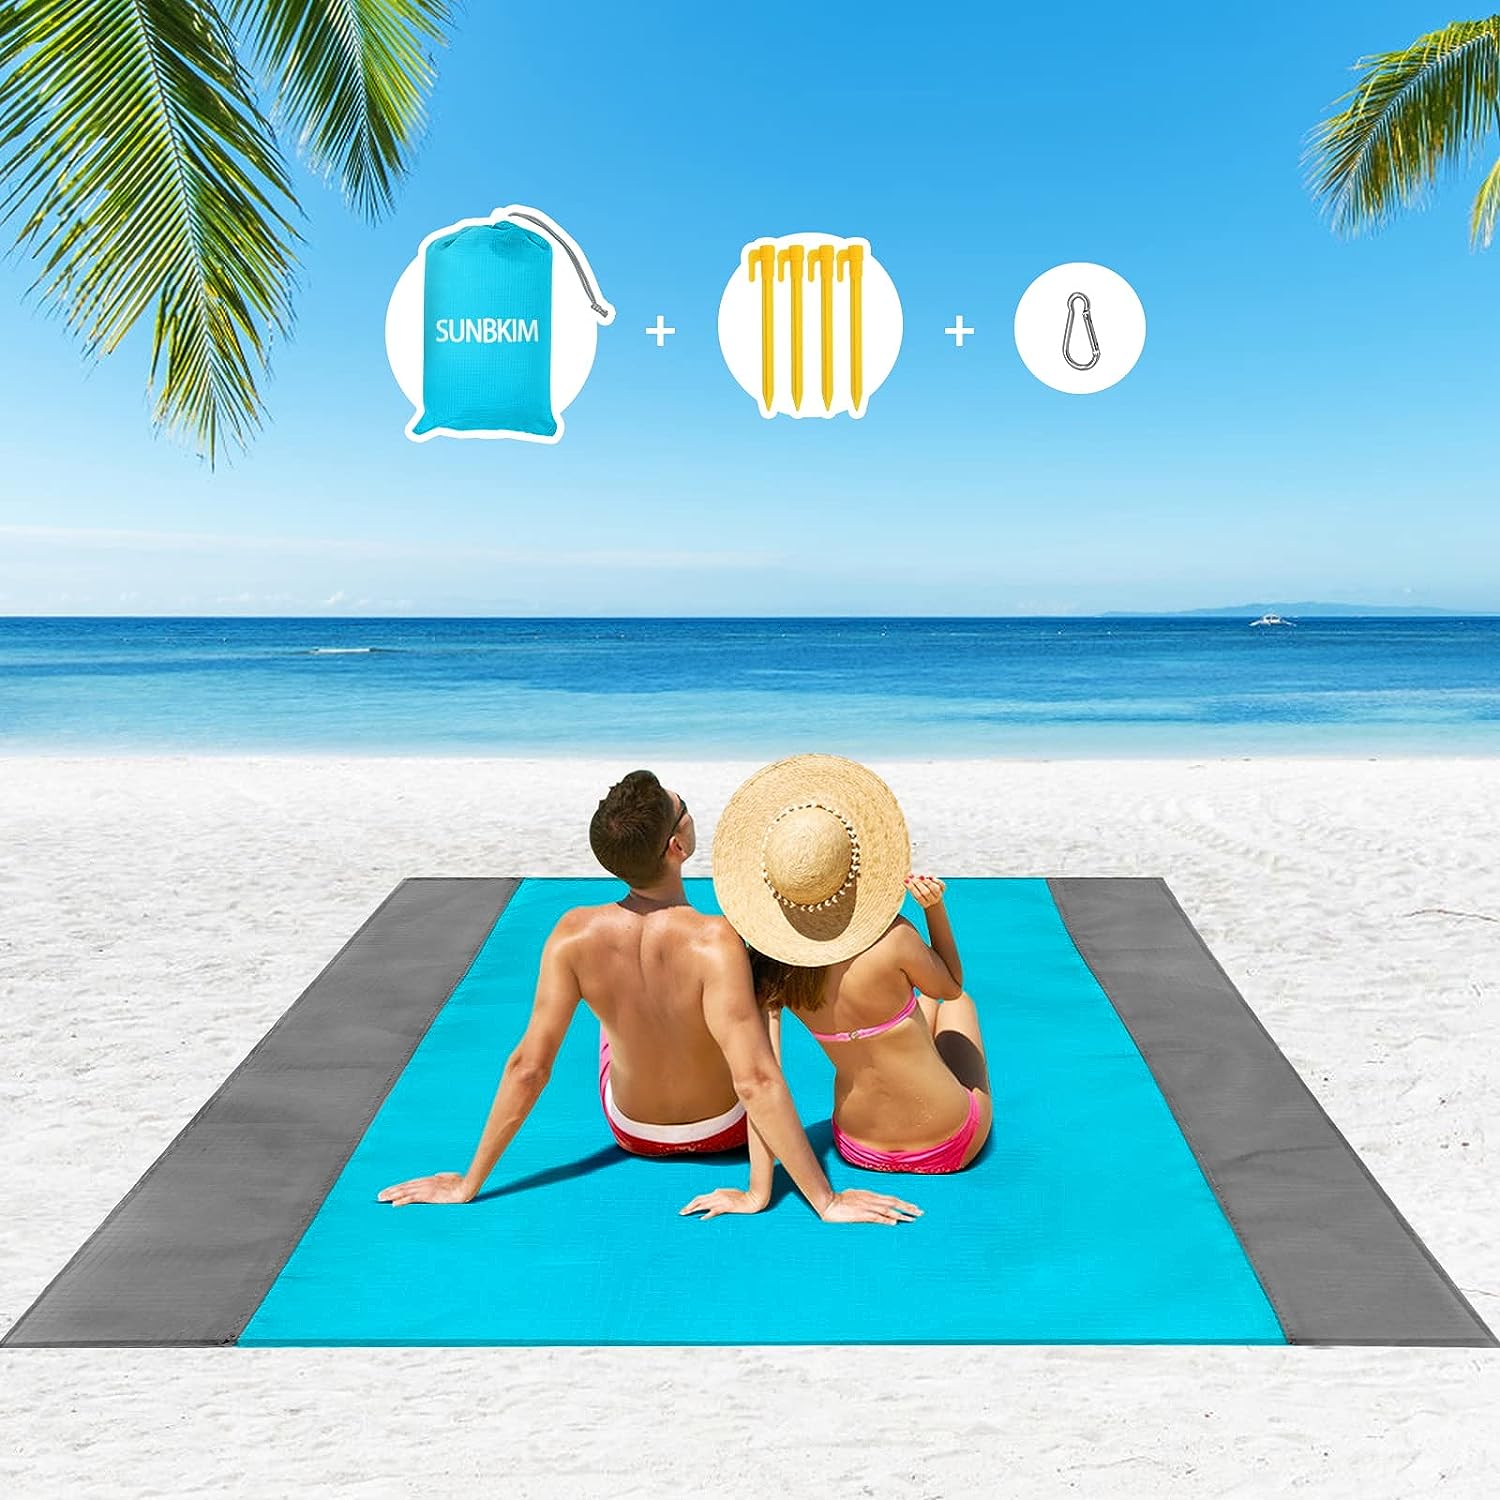 SYCHENG Beach Blacket, Sandproof Waterproof Beach Mat Oversized for 1-8 Adults, Portable Outdoor Picnic Mat for Camping, Travel, Hiking - Blue